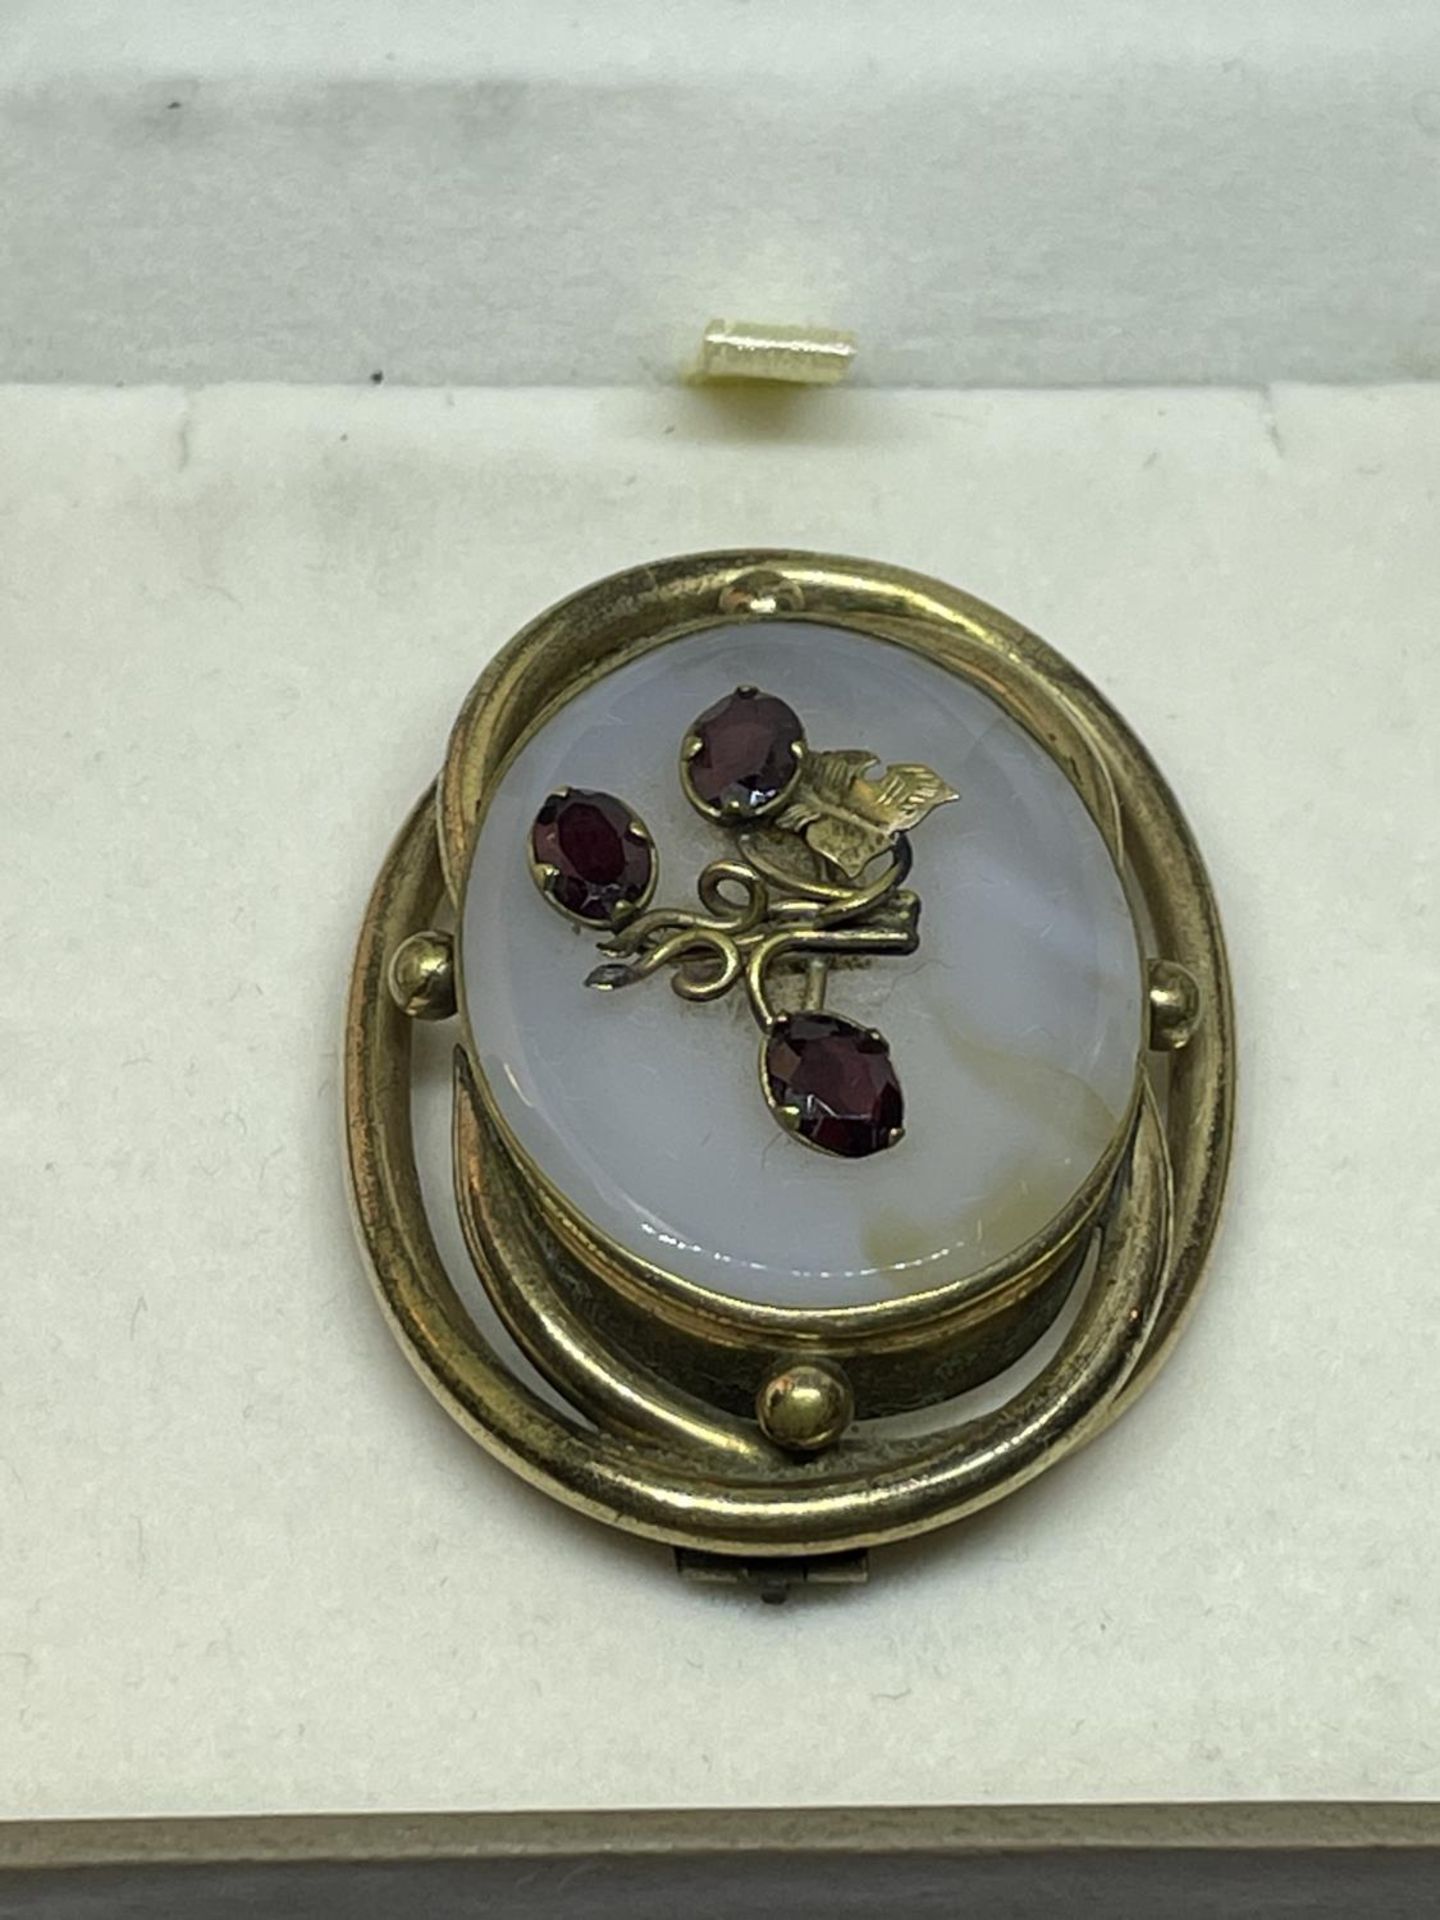 A PINCH BECK AGATE AND AMETHYST BROOCH IN A PRESENTATION BOX